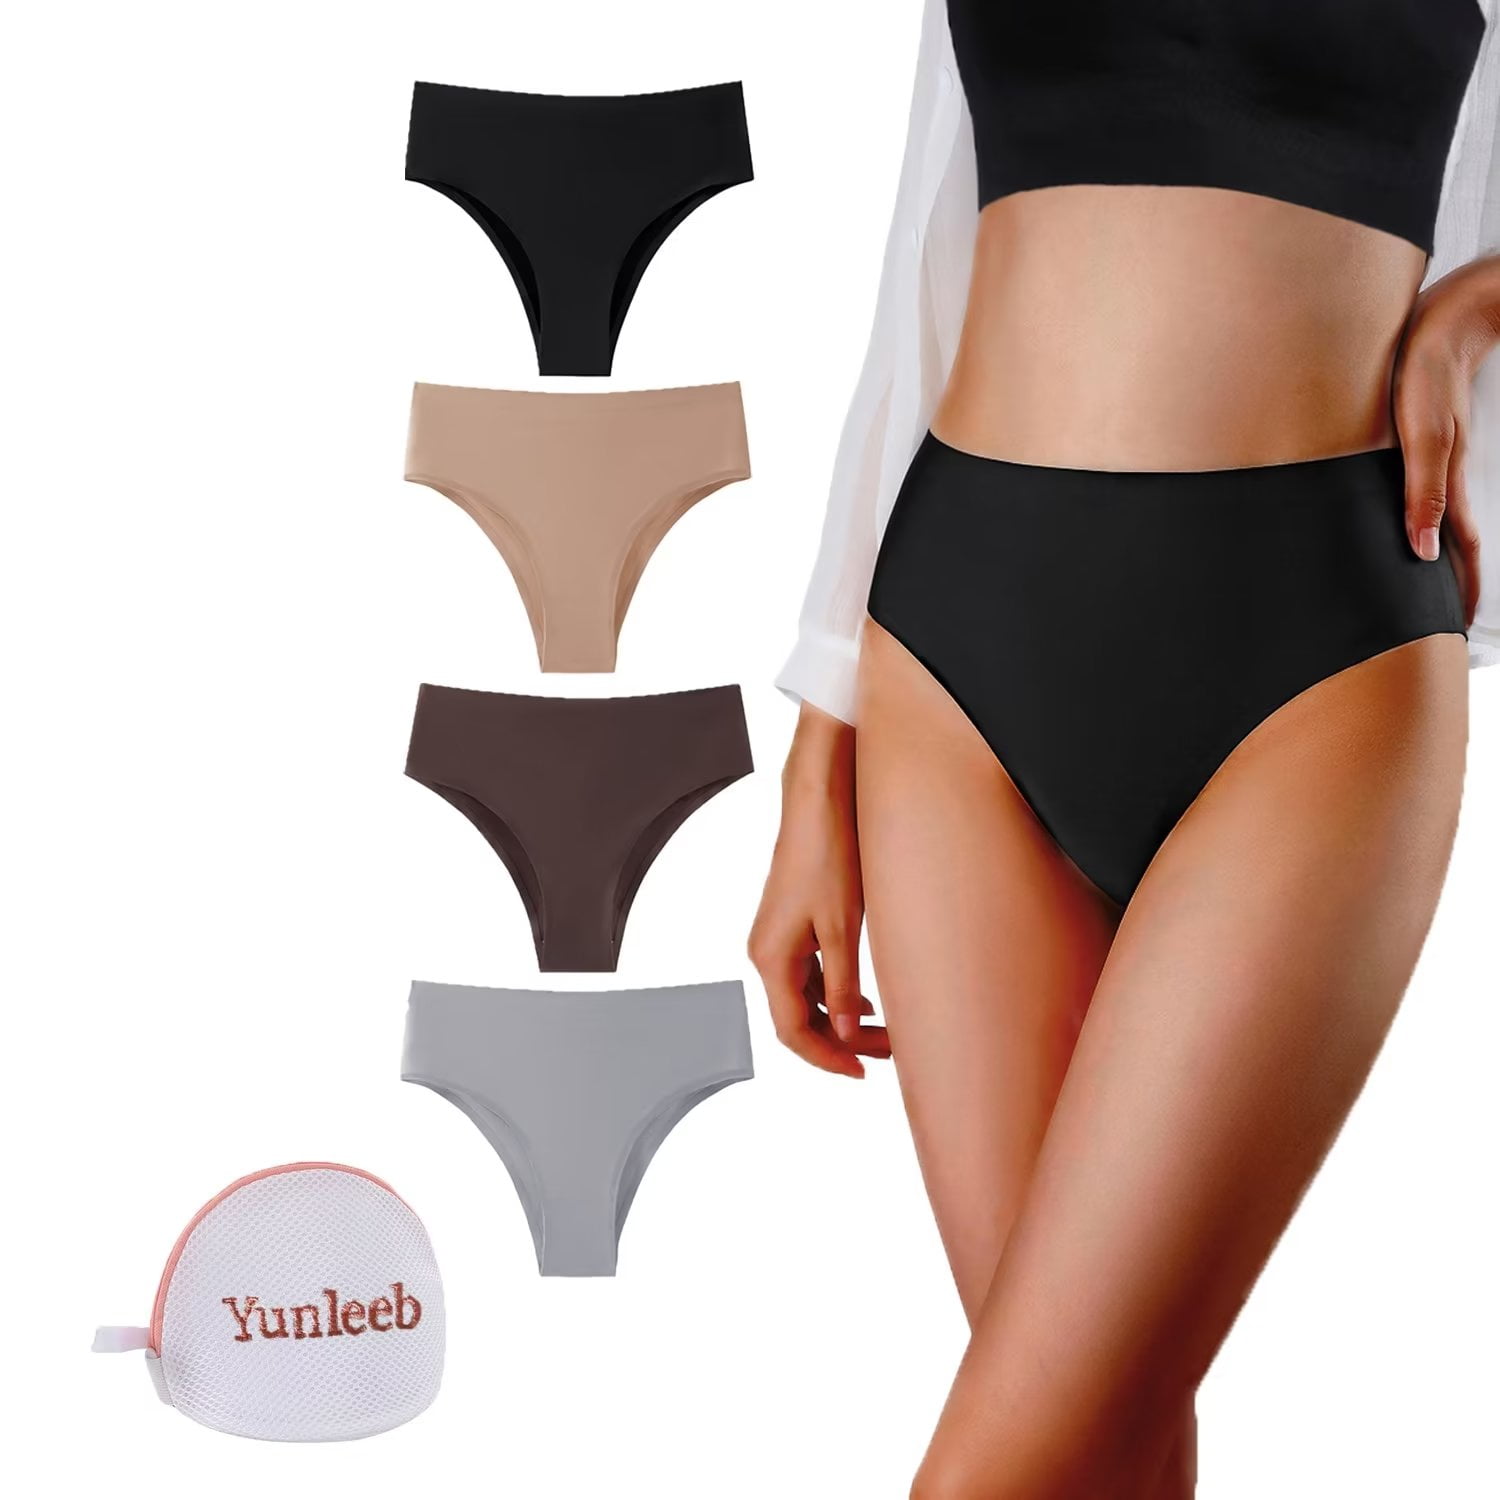 Yunleeb Seamless Underwear for Women No Show Panties Feel Air Hipster  Panties for Women Pack 4 (XS~XL) Black XL 